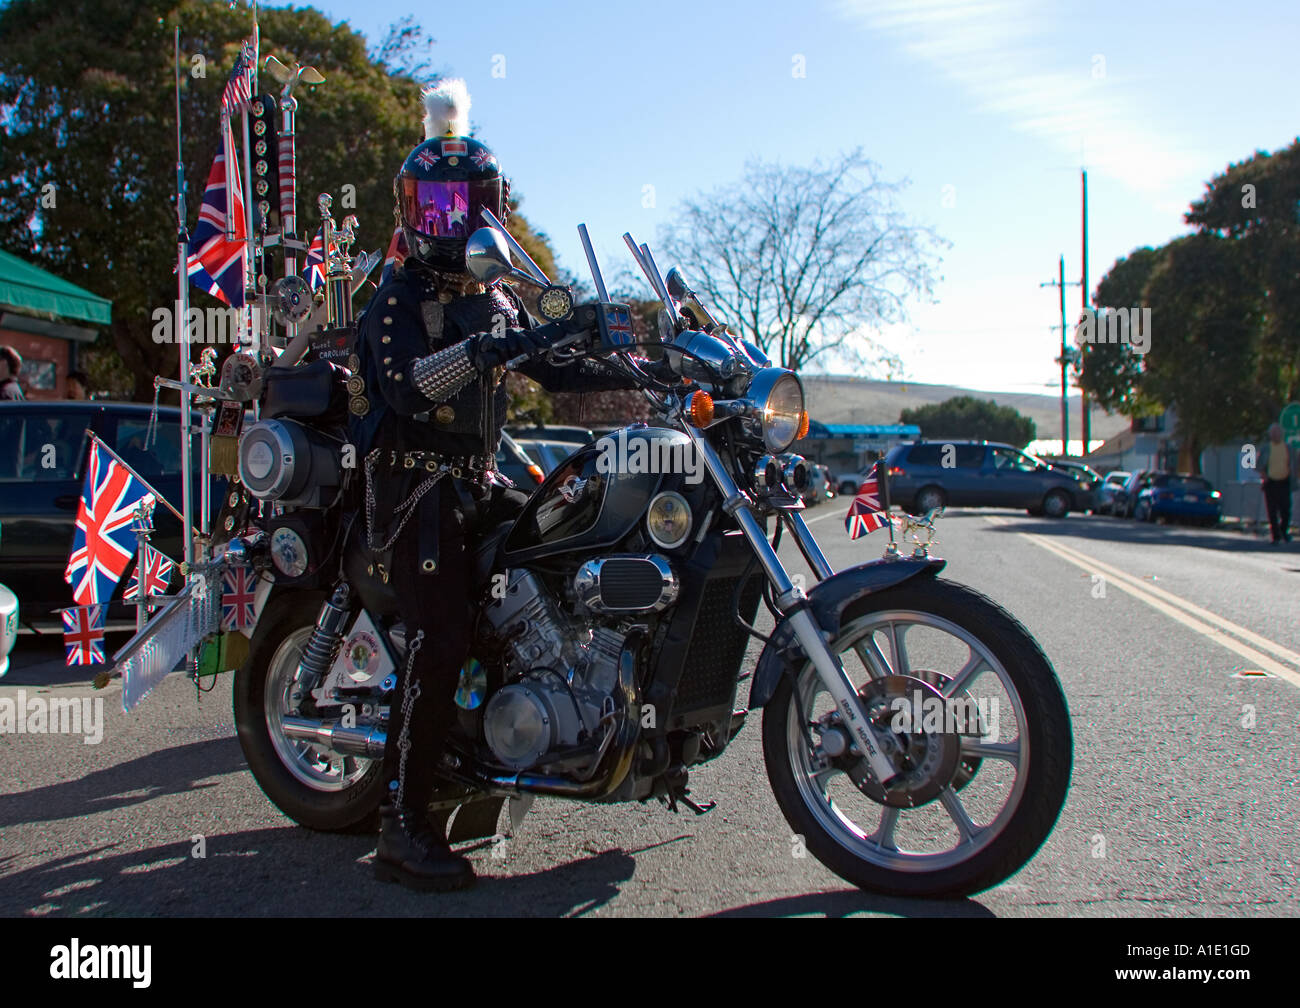 Biker riding on an Iron Horse motorcycle Marin County California United States of America Stock Photo